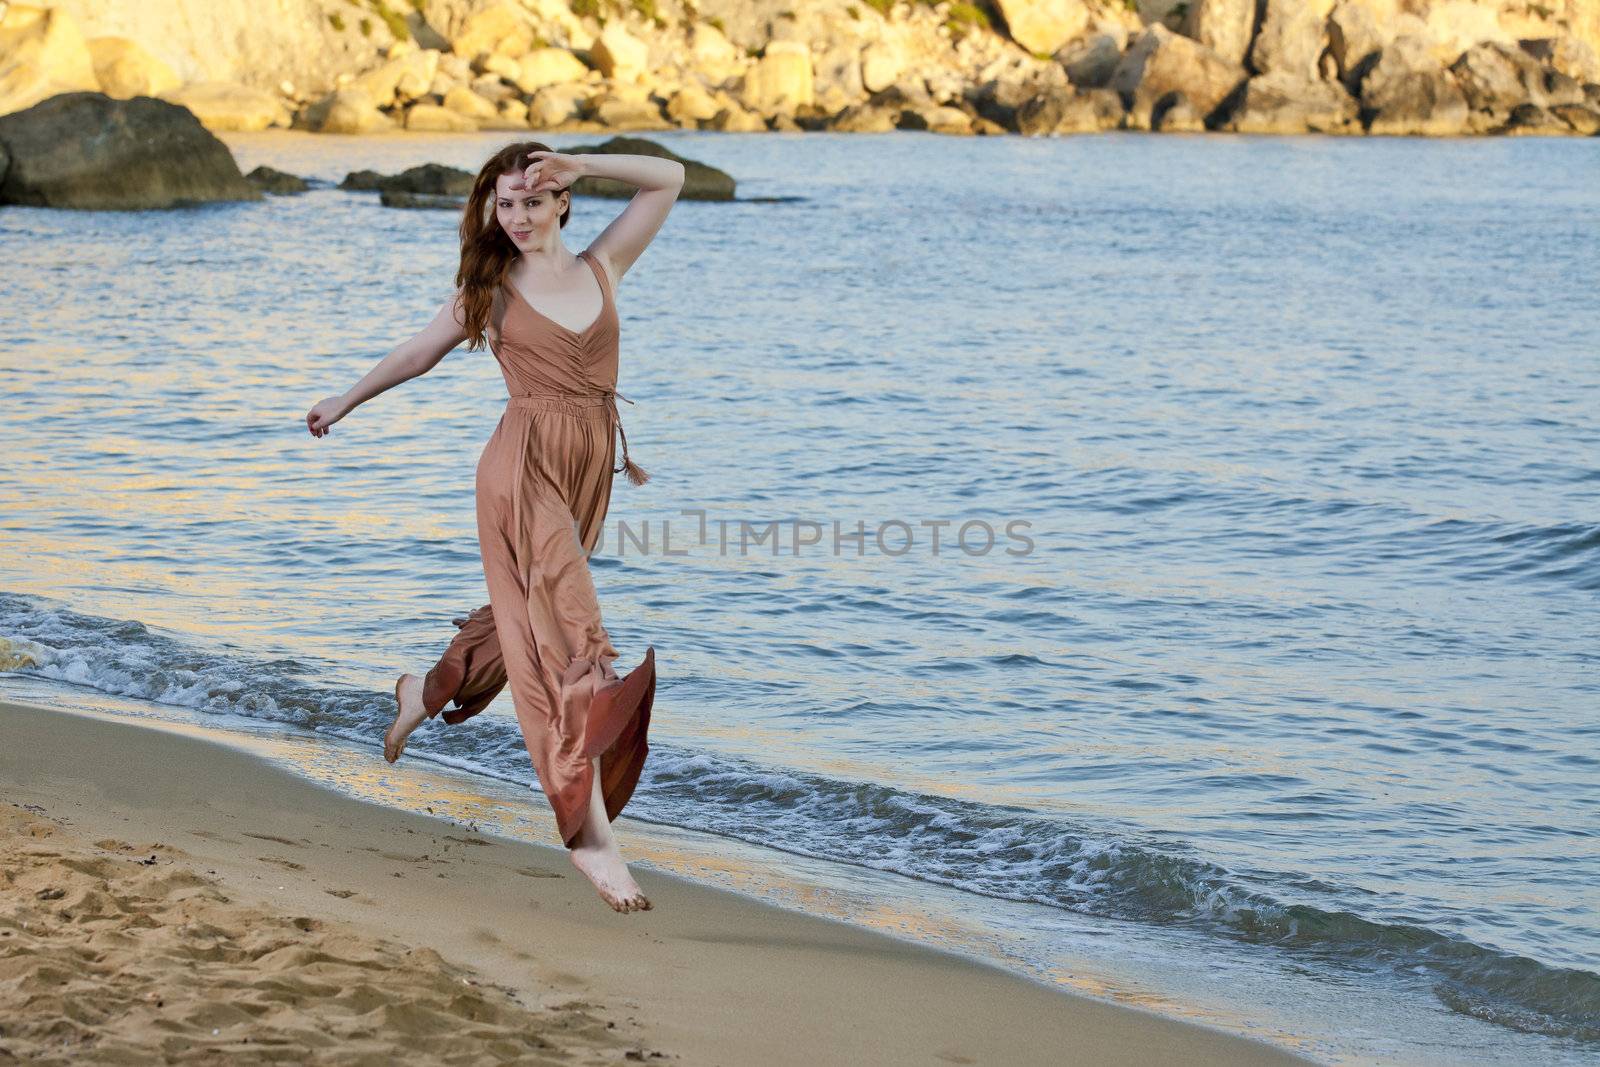 A young female model and dancer jumps and dances on a Mediterranean beach